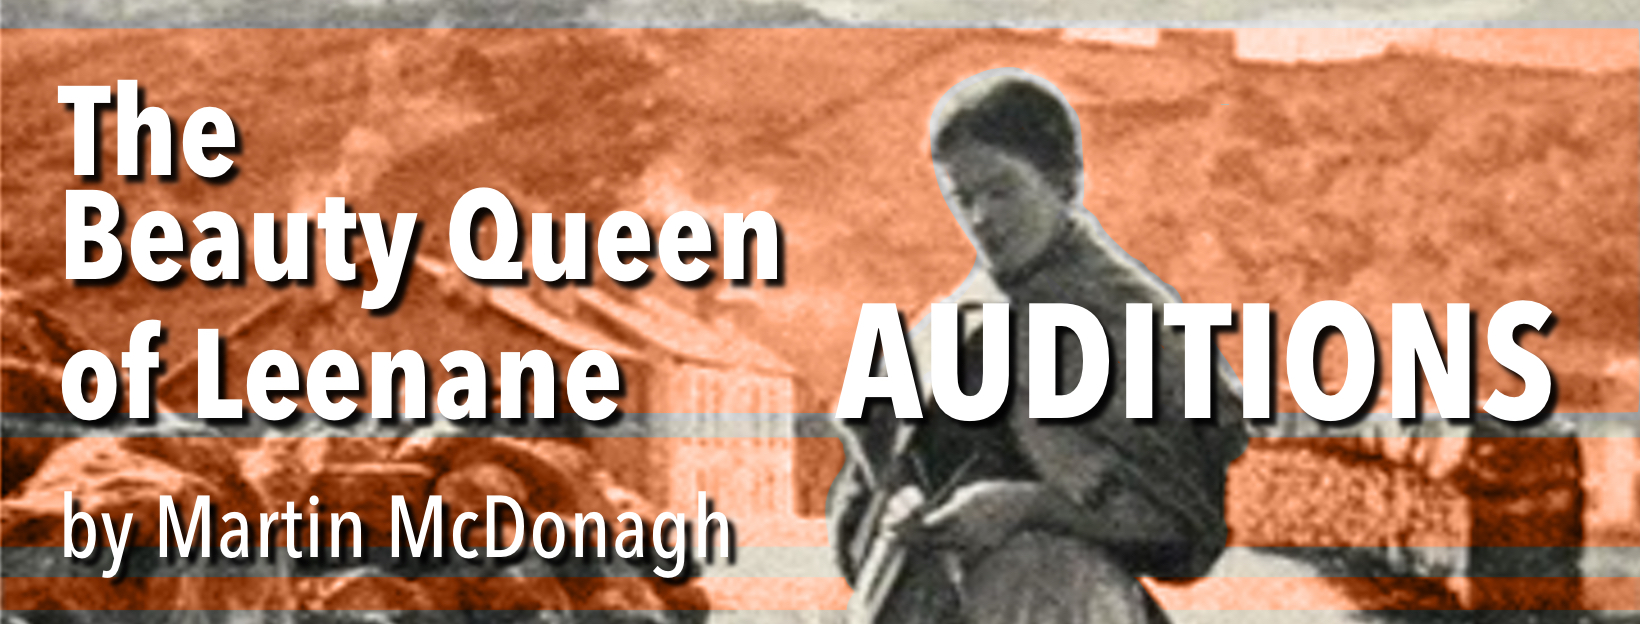 Auditions for Tony Award Winning, "Beauty Queen of Leenane